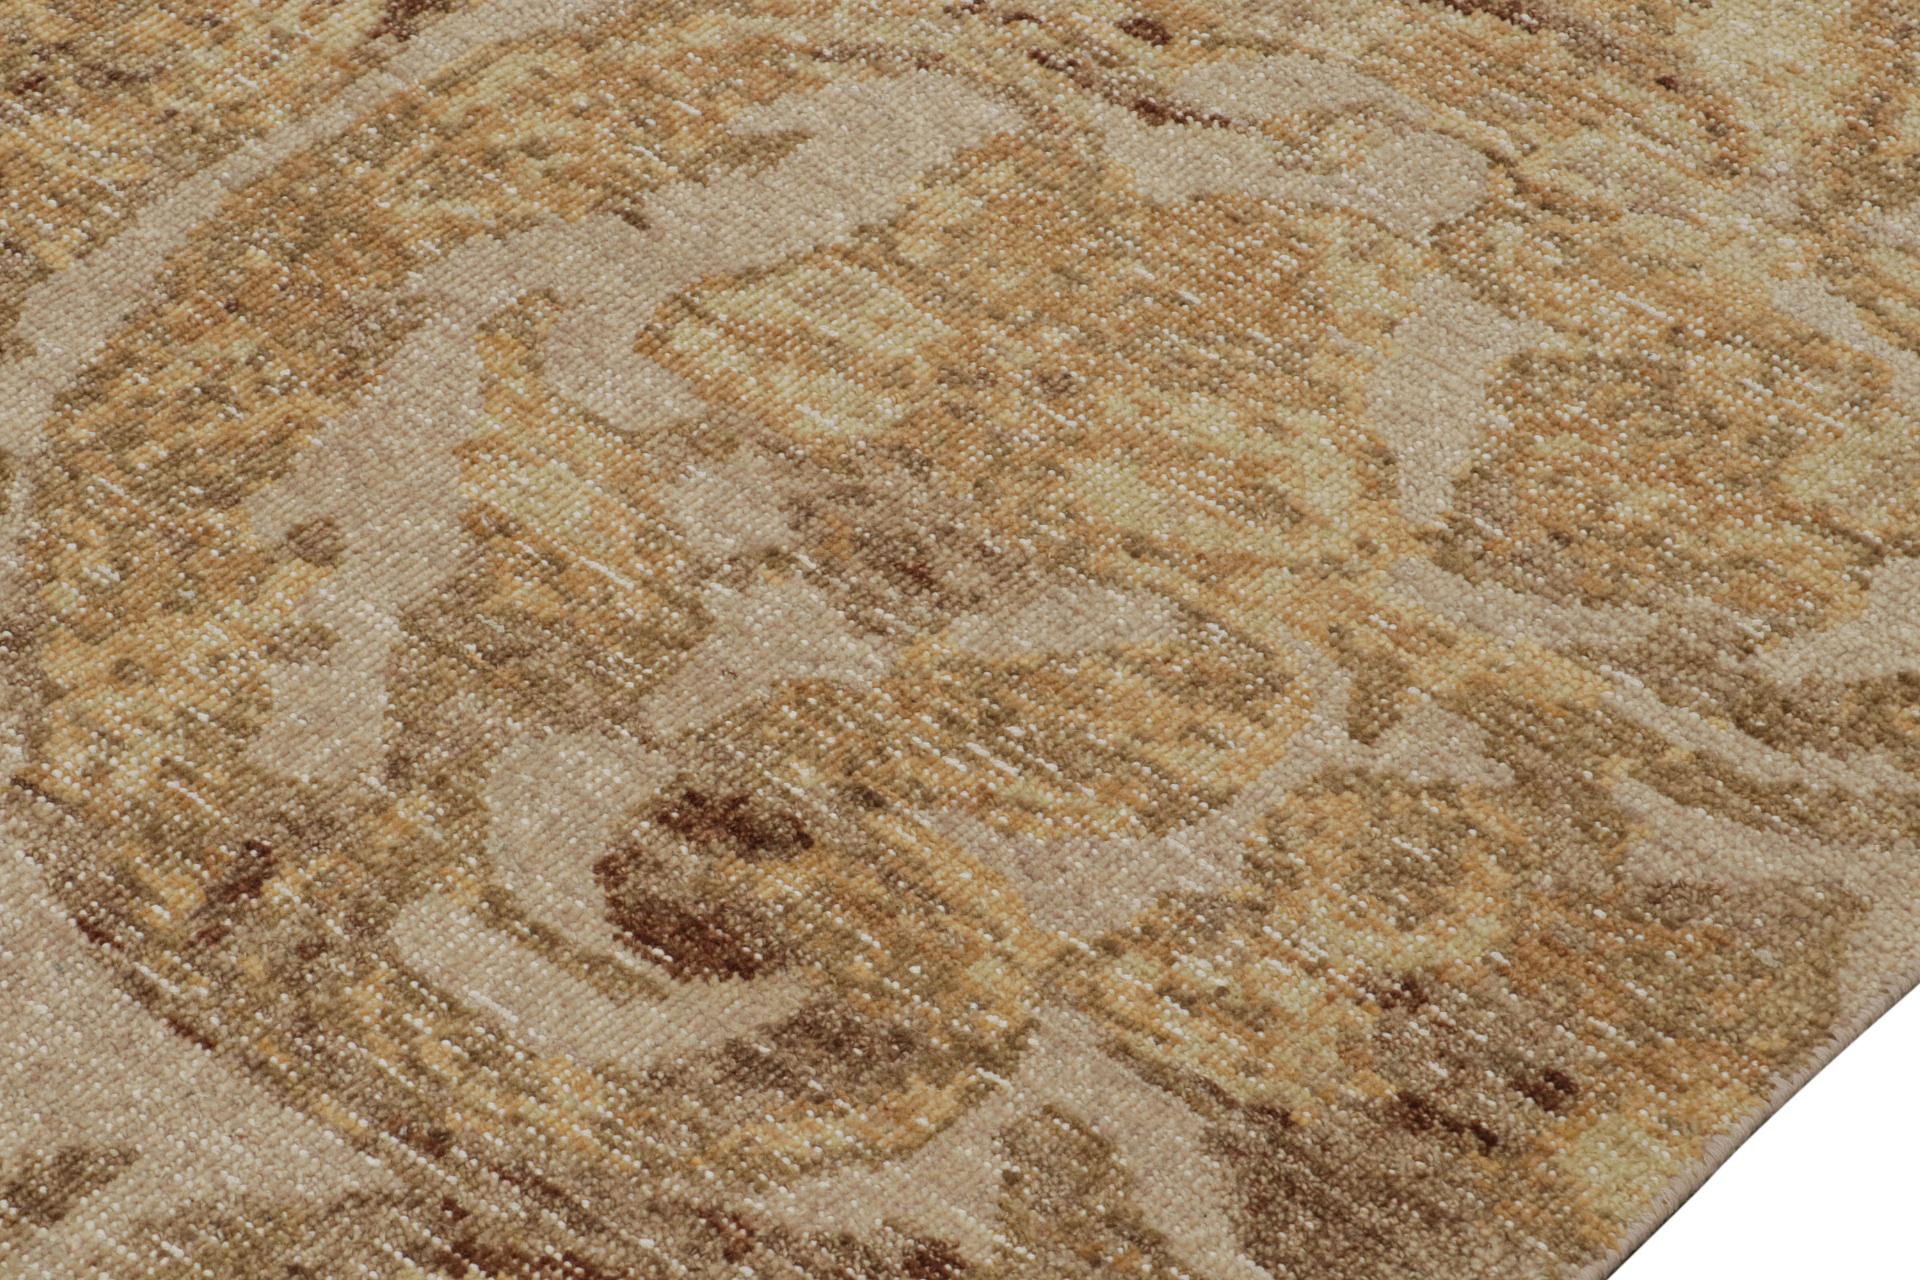 Hand-Knotted Rug & Kilim’s Distressed European Rug In Beige-Brown & Gold Floral Pattern For Sale